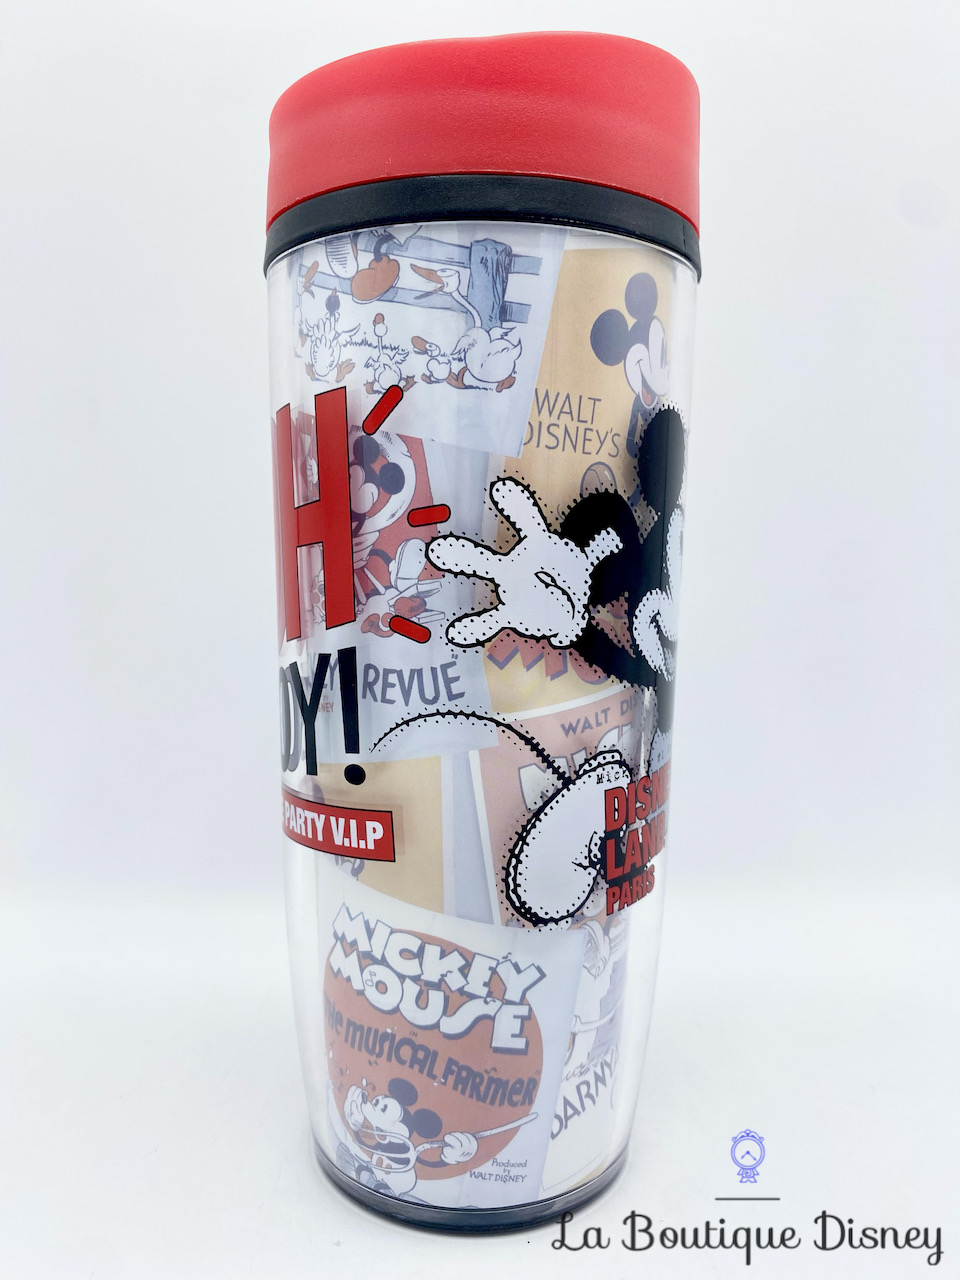 thermos-mickey-mouse-oh-boy-mouse-party-vip-disneyland-paris-mug-voyage-disney-rouge-4